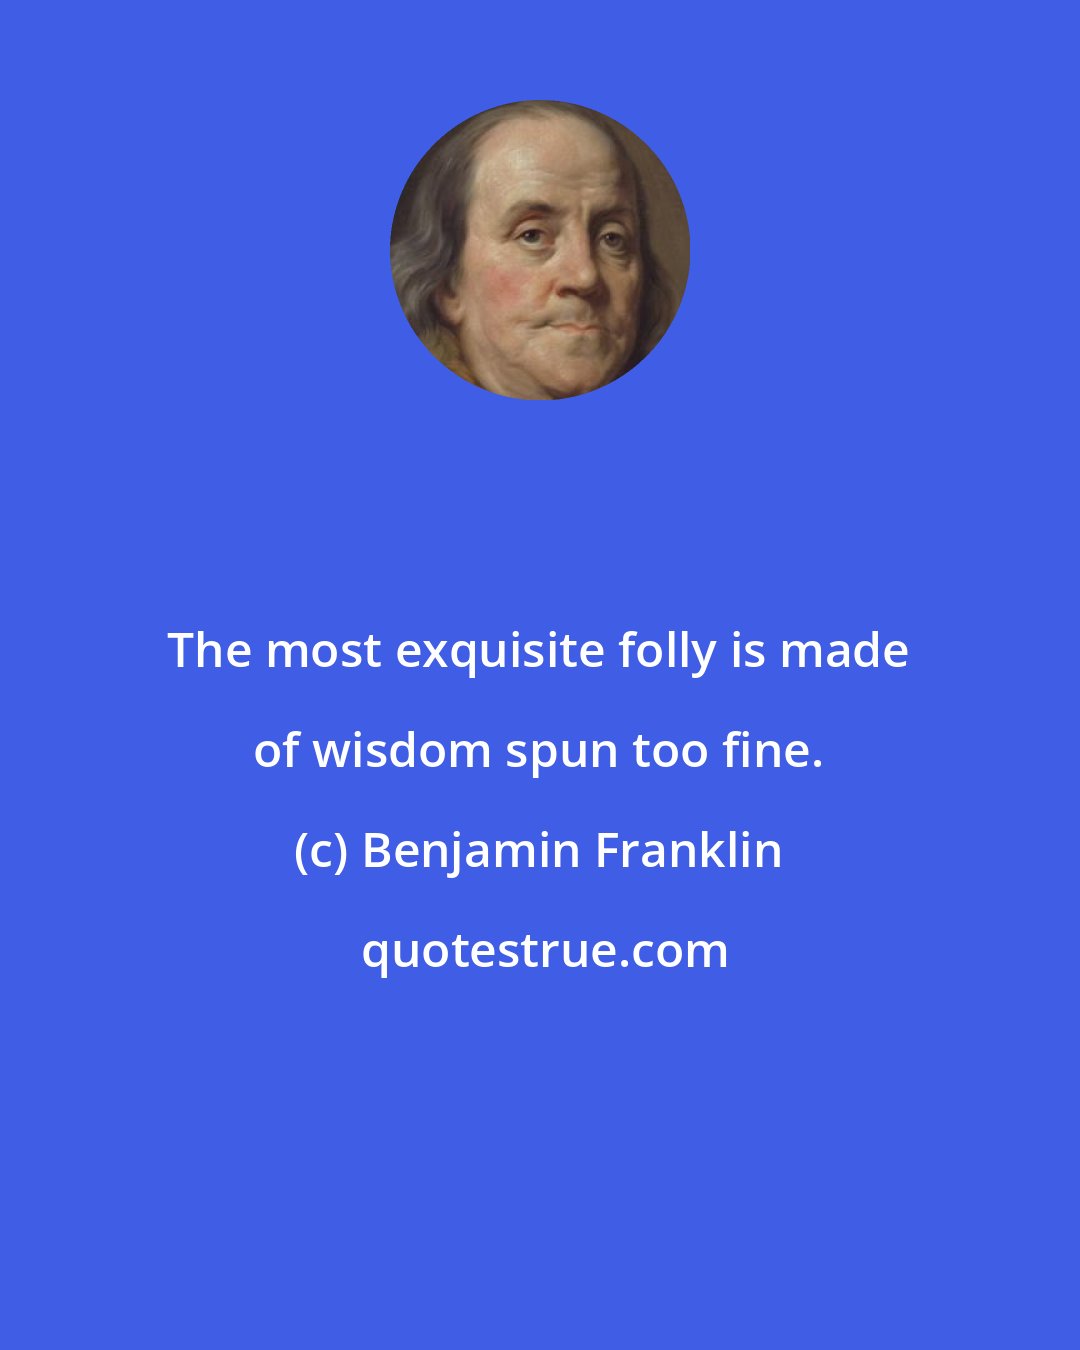 Benjamin Franklin: The most exquisite folly is made of wisdom spun too fine.